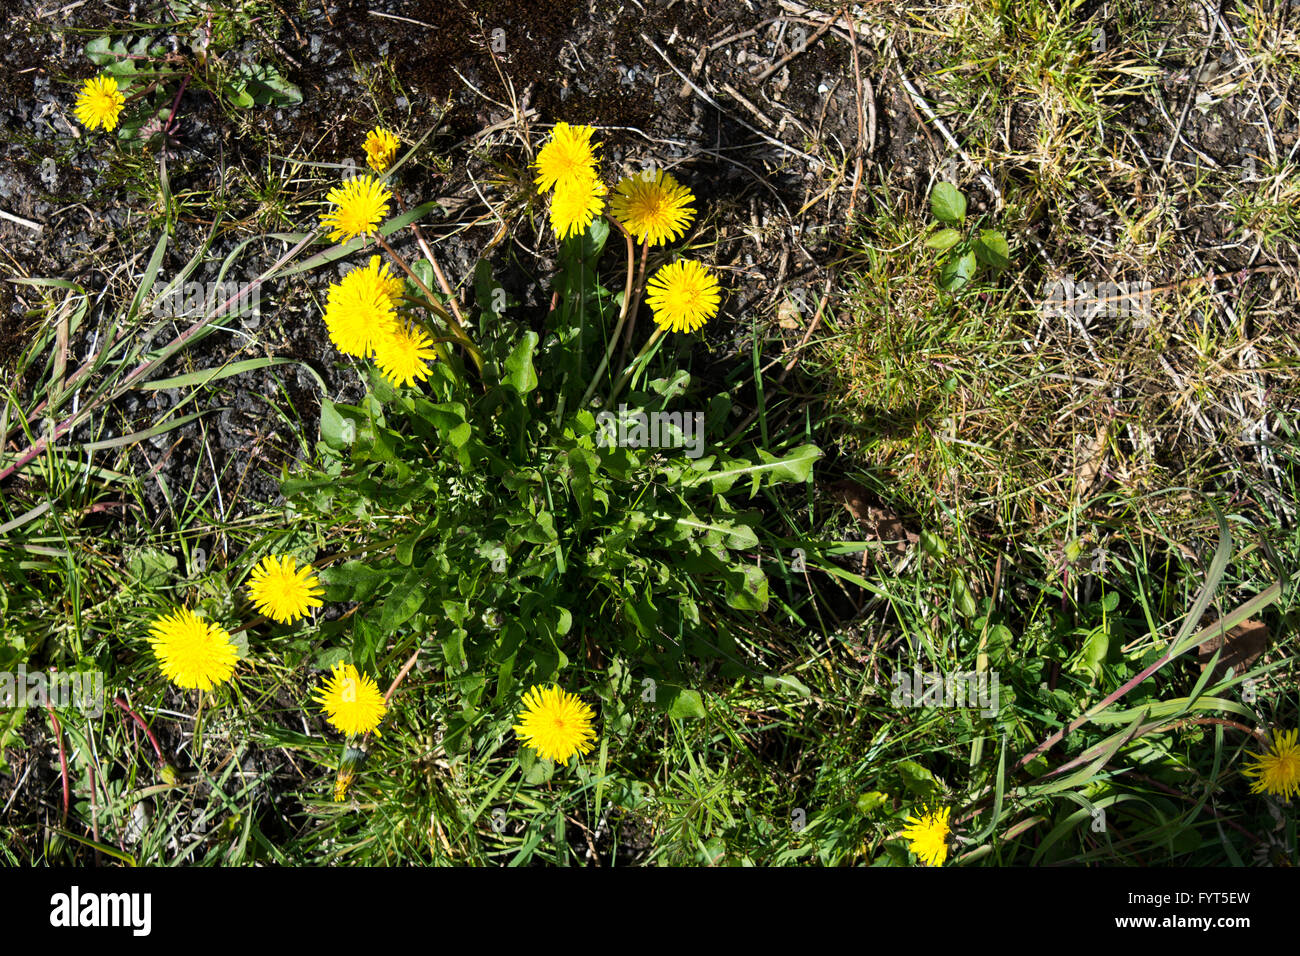 Common Dandelions (Taraxacum officinale) in flower growing in a lawn with the leaves and formation clearly visible Stock Photo